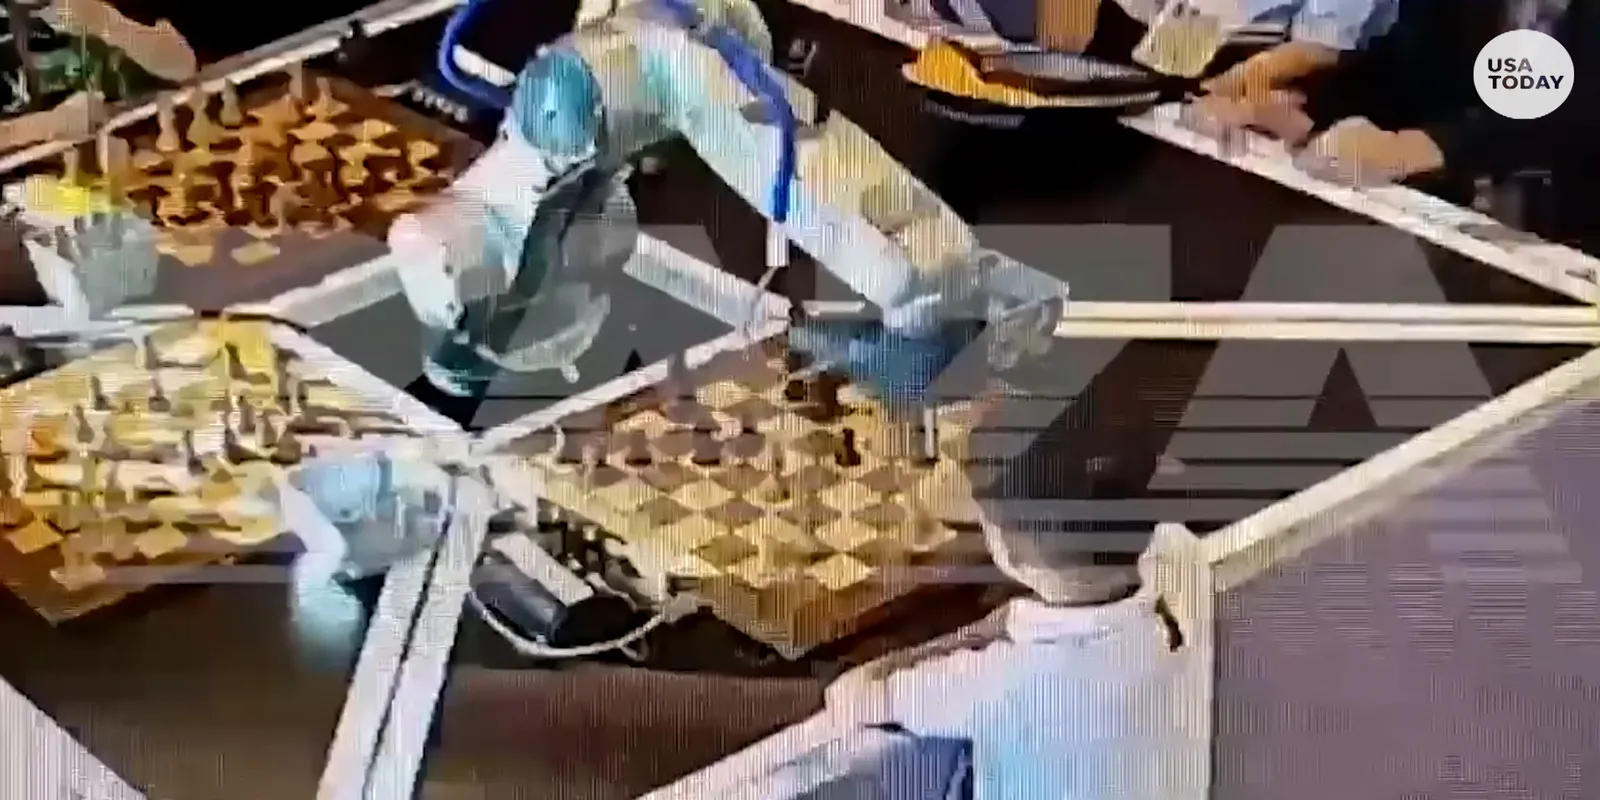 Angry Chess Robot Breaks Kid's Finger - FreebieMNL